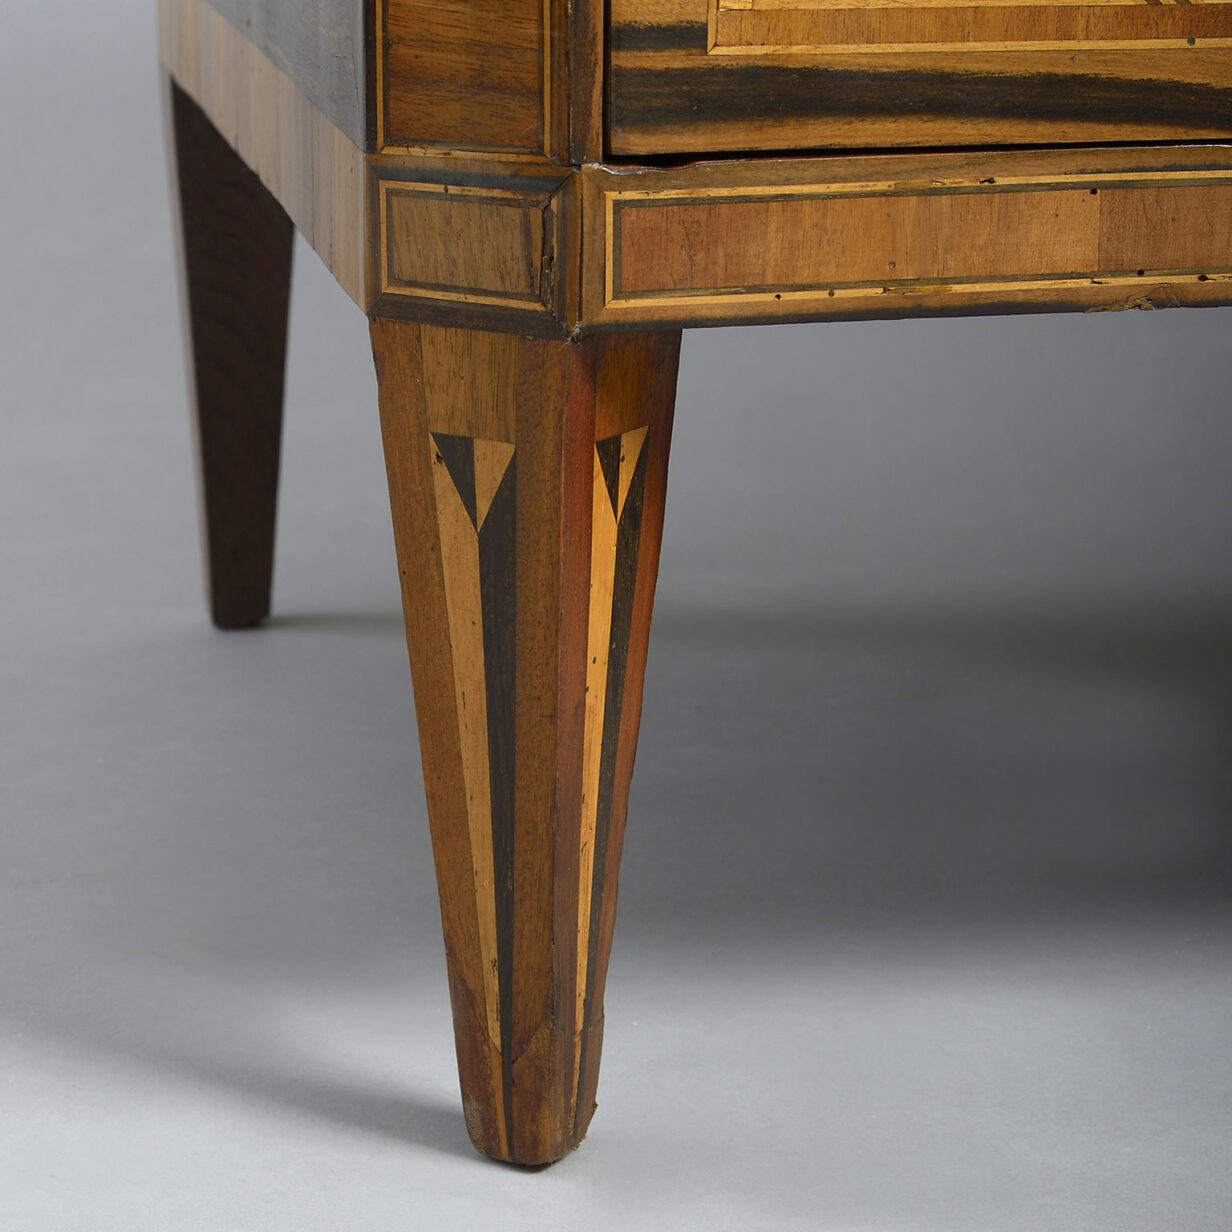 Parquetry Commode